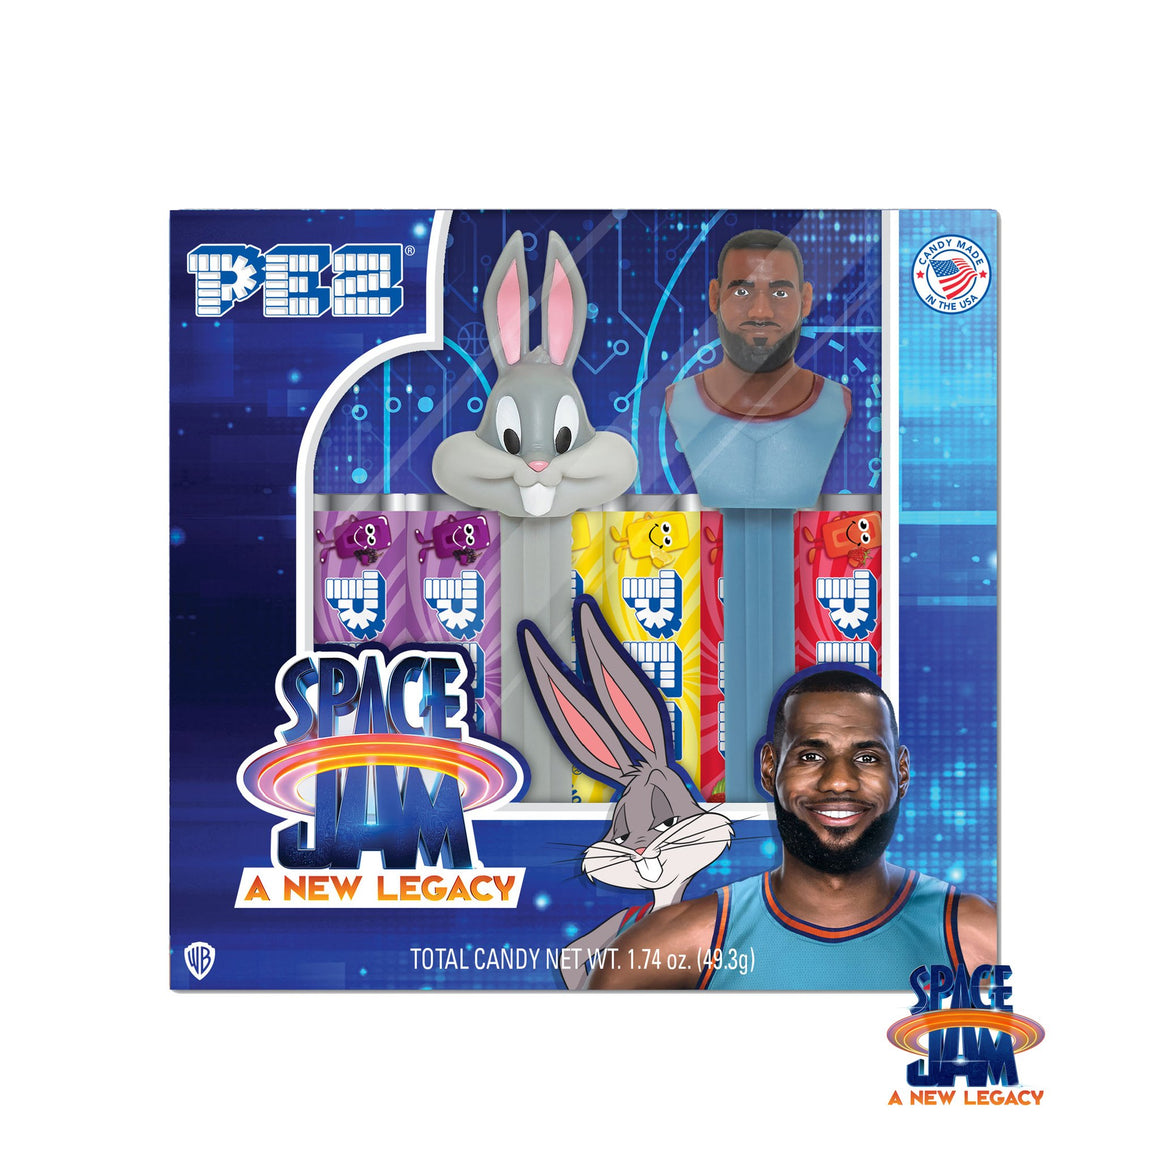 All City Candy PEZ- Space Jam Gift Set (Bugs Bunny & LeBron James) Novelty PEZ Candy For fresh candy and great service, visit www.allcitycandy.com